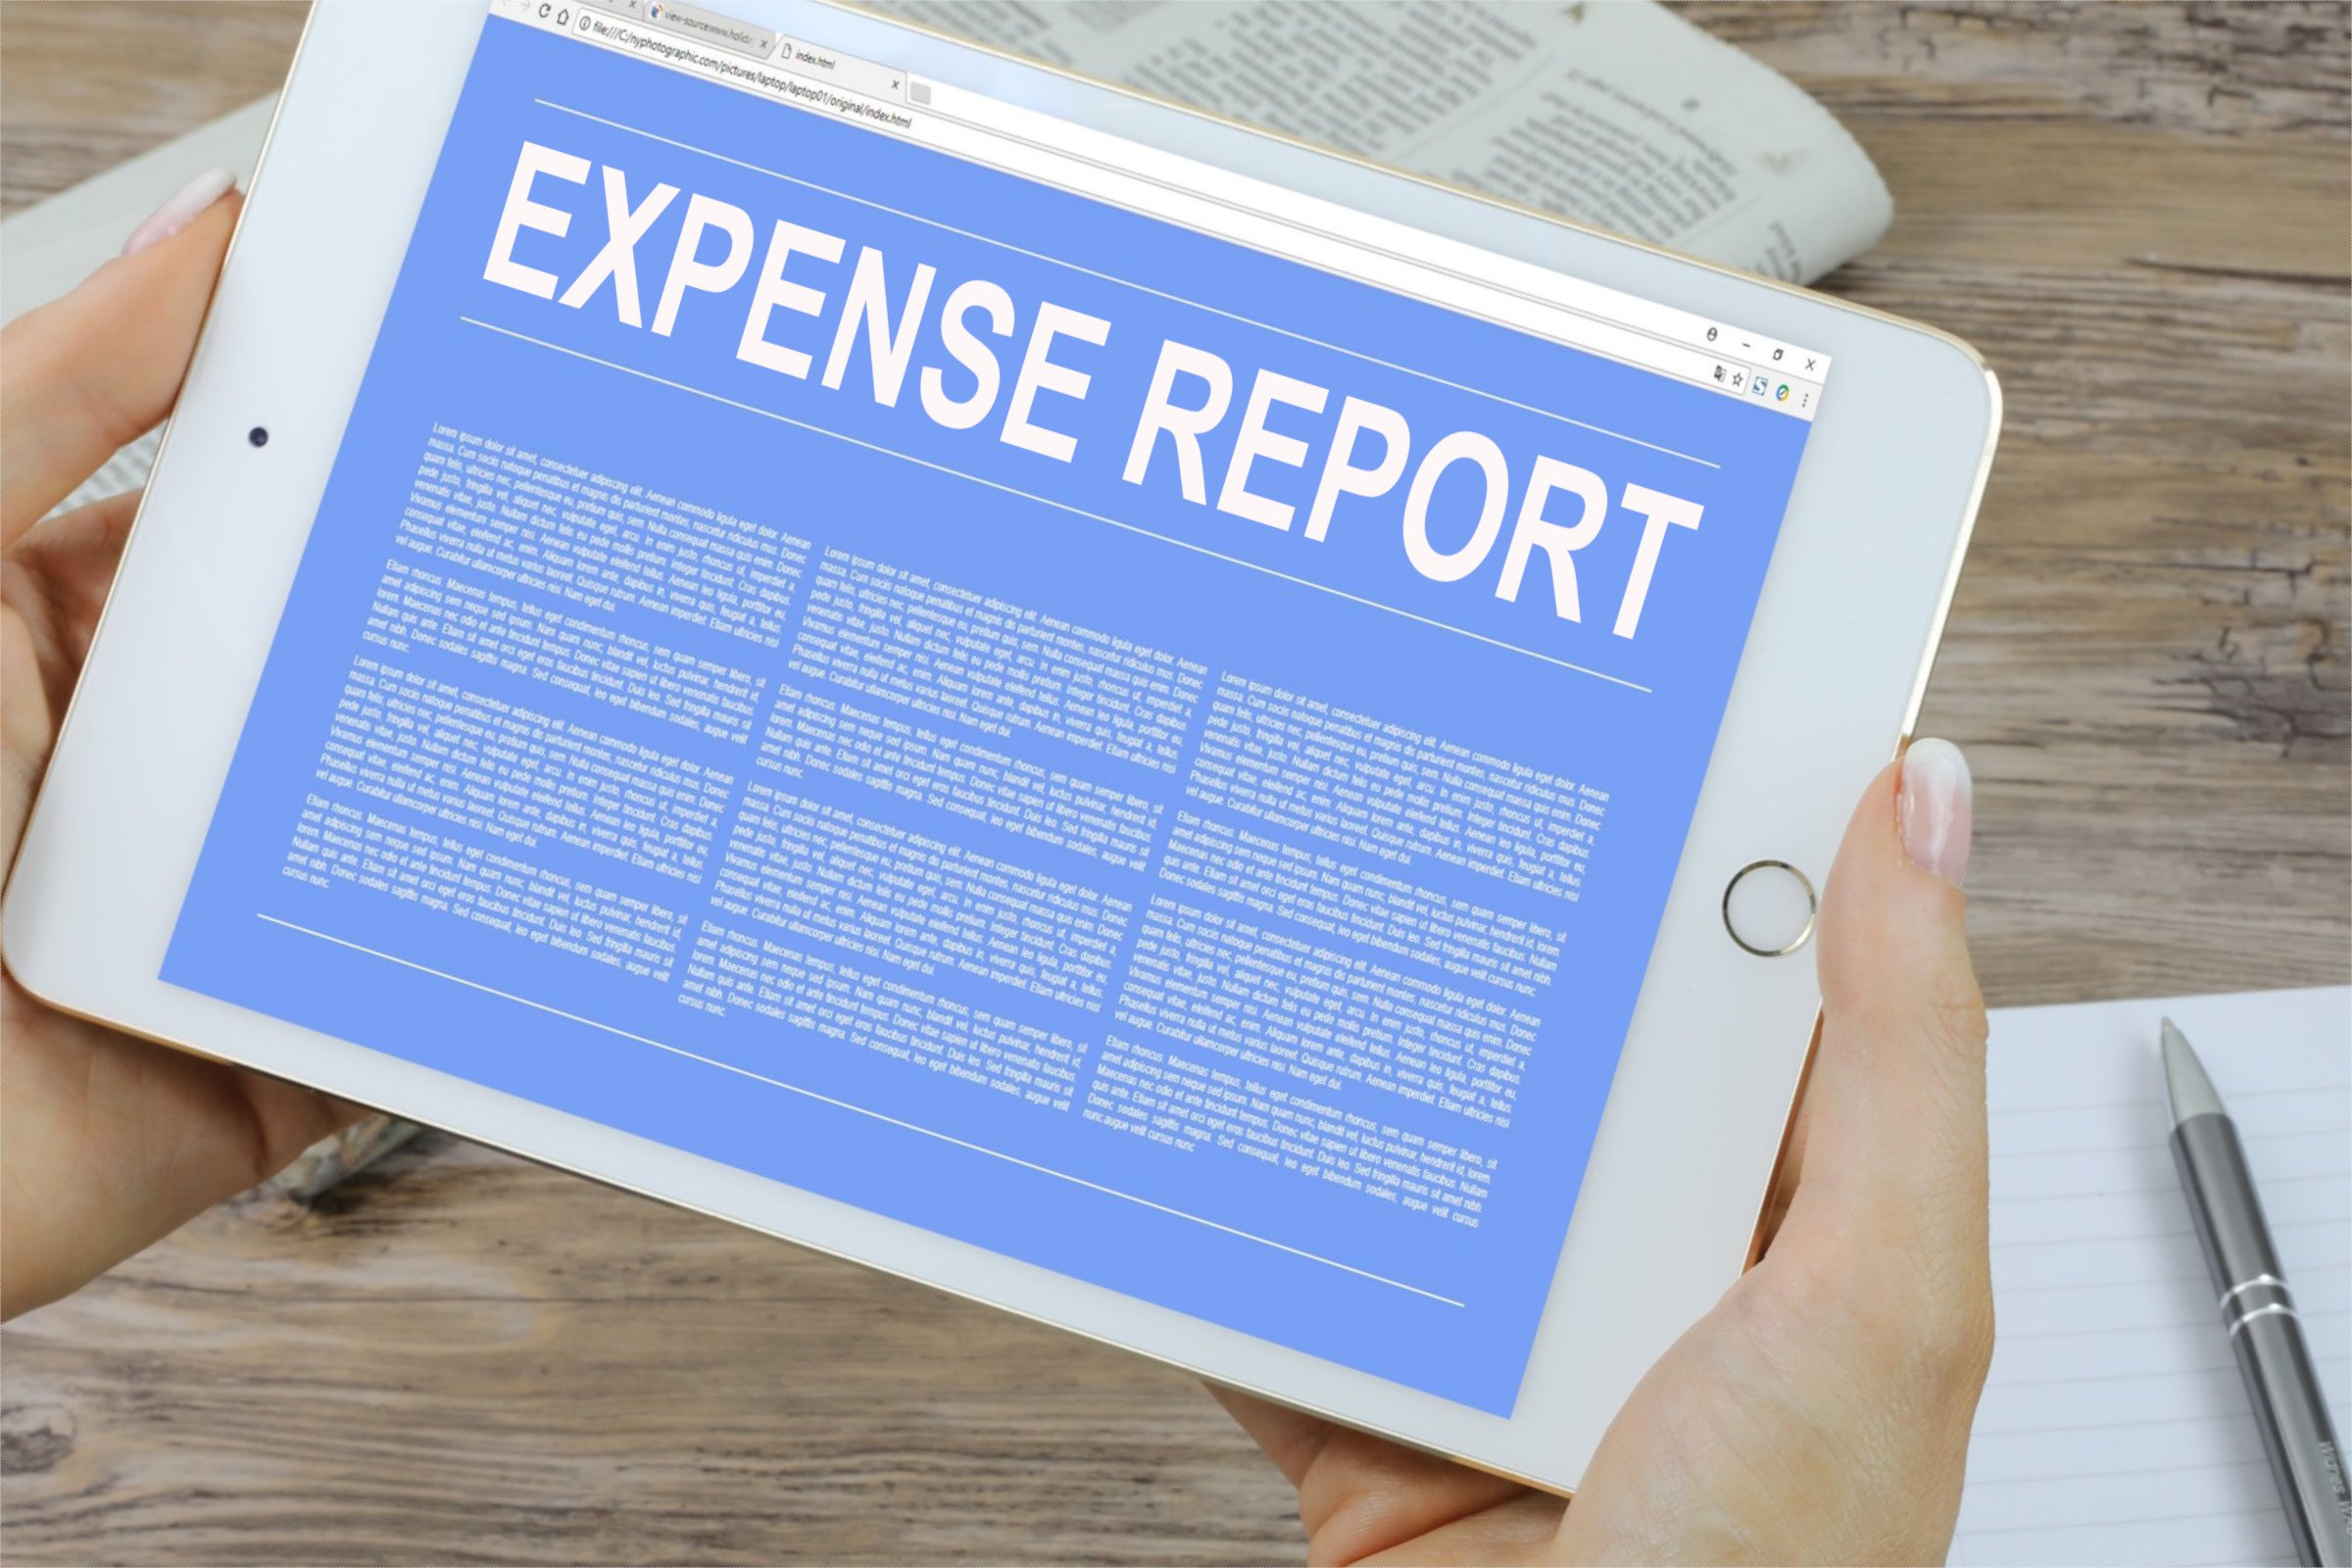 expense report